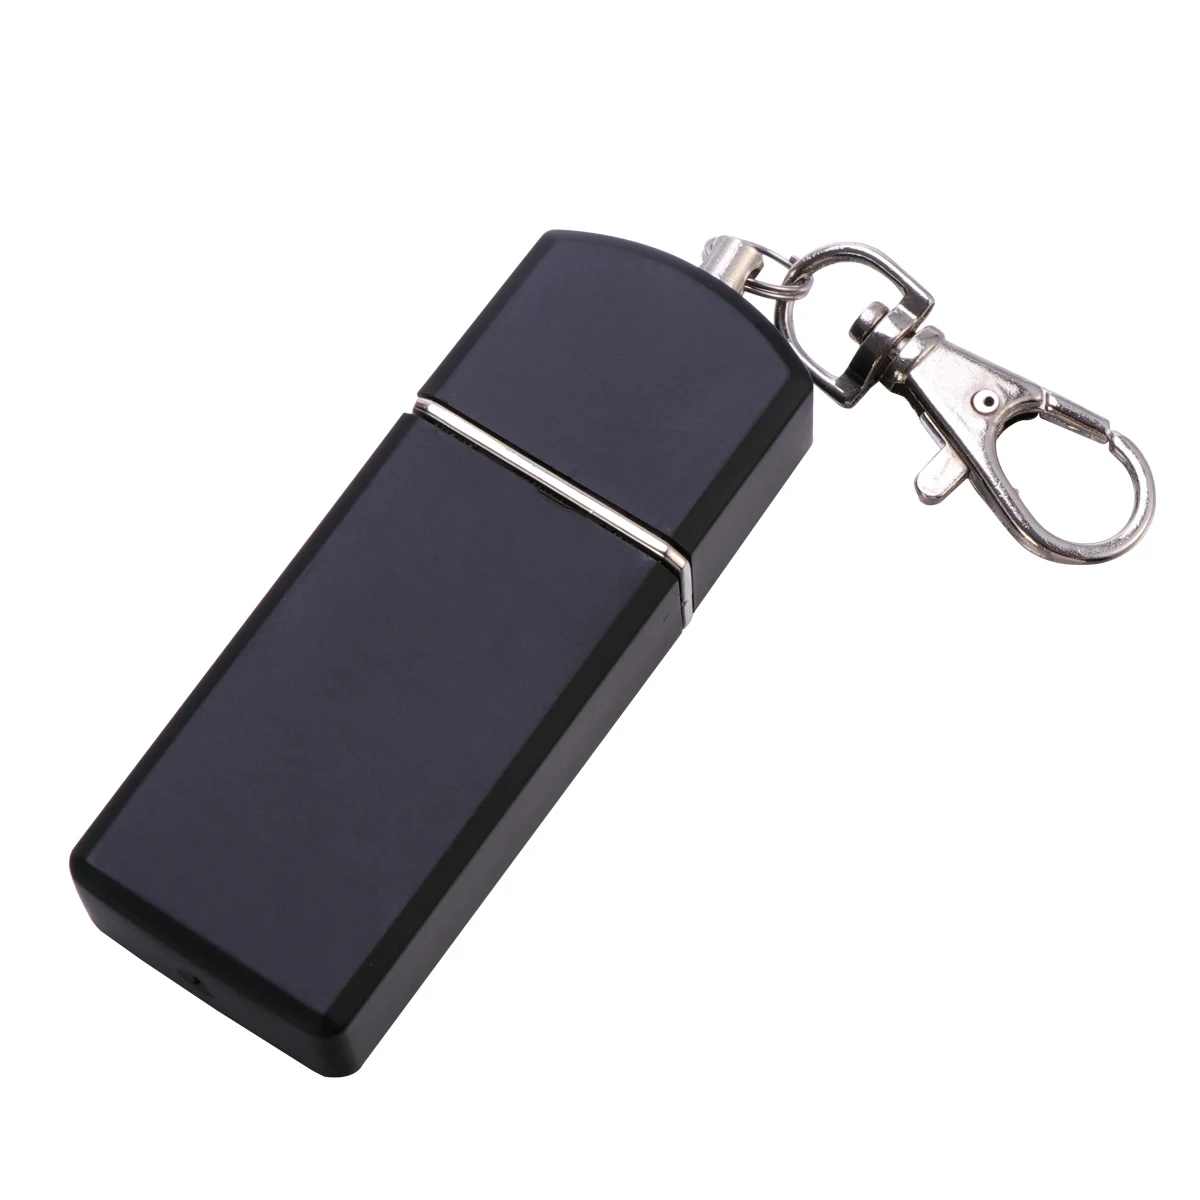 Portable Ashtray Cigarette for Outdoor Use Ash Holder Pocket Smoking Tray with Lid Key Chain Travelling | Украшения и аксессуары